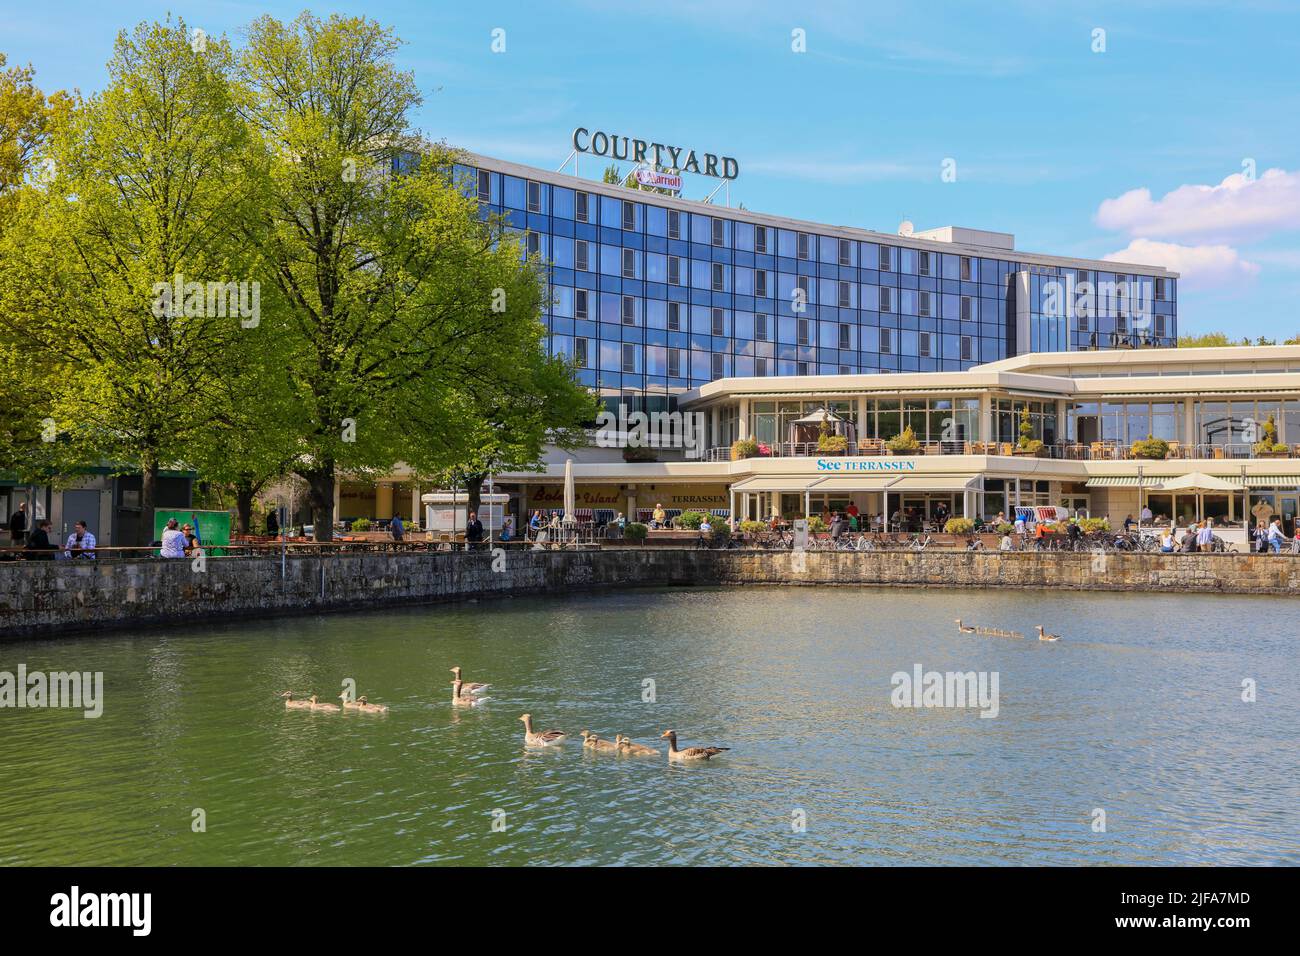 Courtyard Marriott Hotel and Seeterrassen, Maschsee, State Capital Hanover, Lower Saxony, Germany Stock Photo